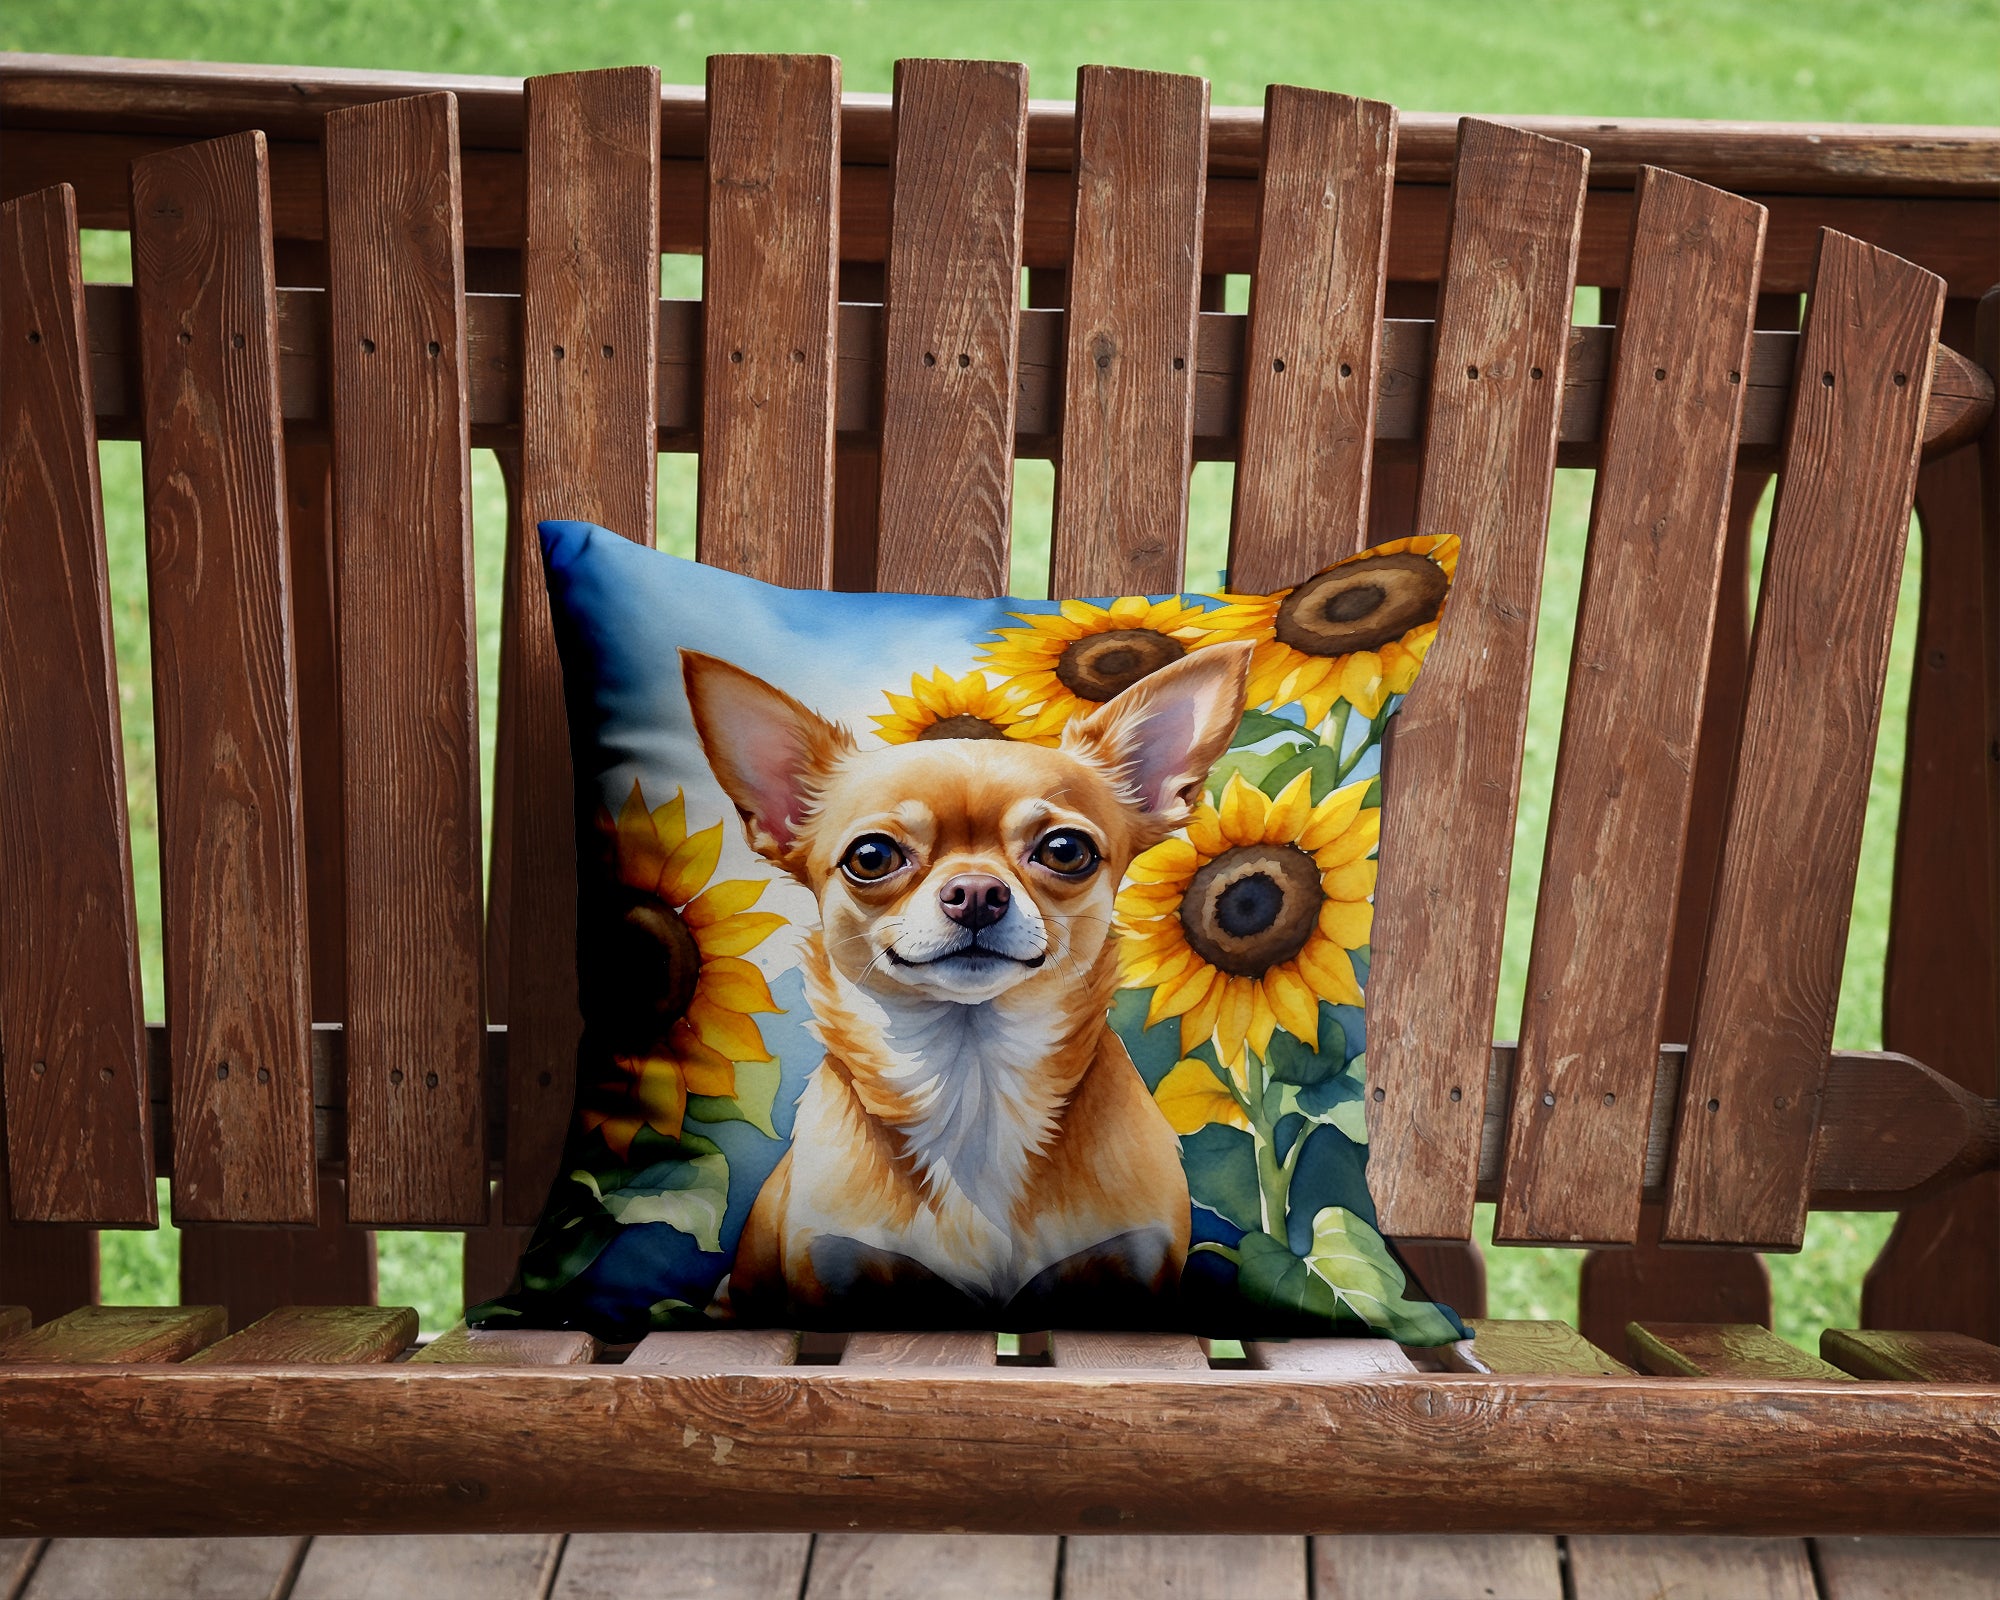 Buy this Chihuahua in Sunflowers Throw Pillow